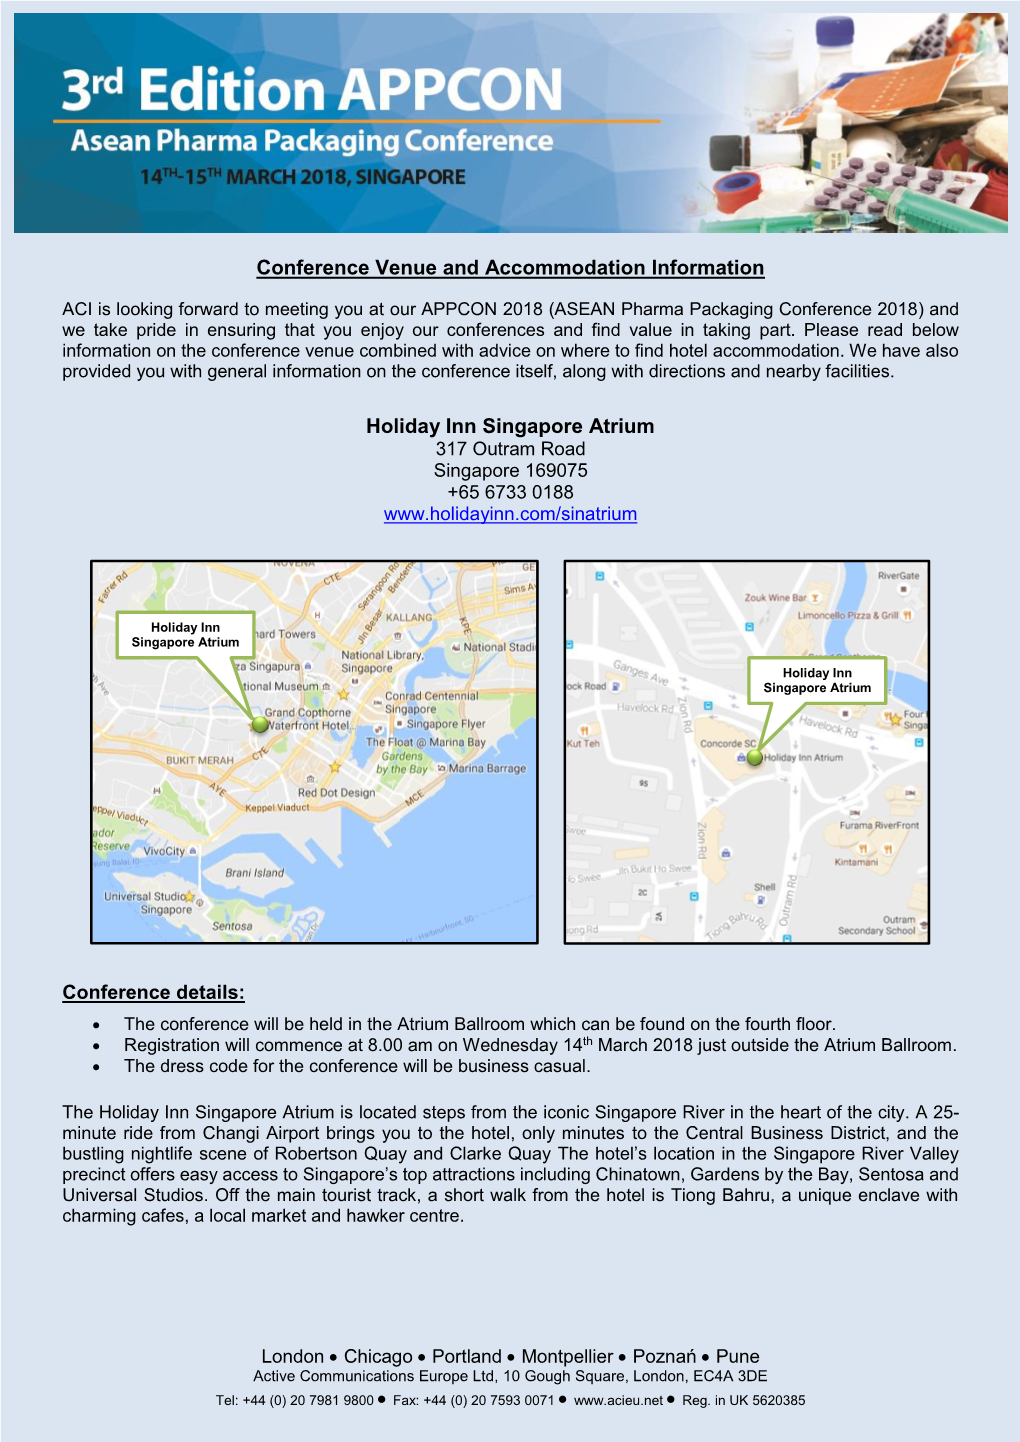 Conference Venue and Accommodation Information